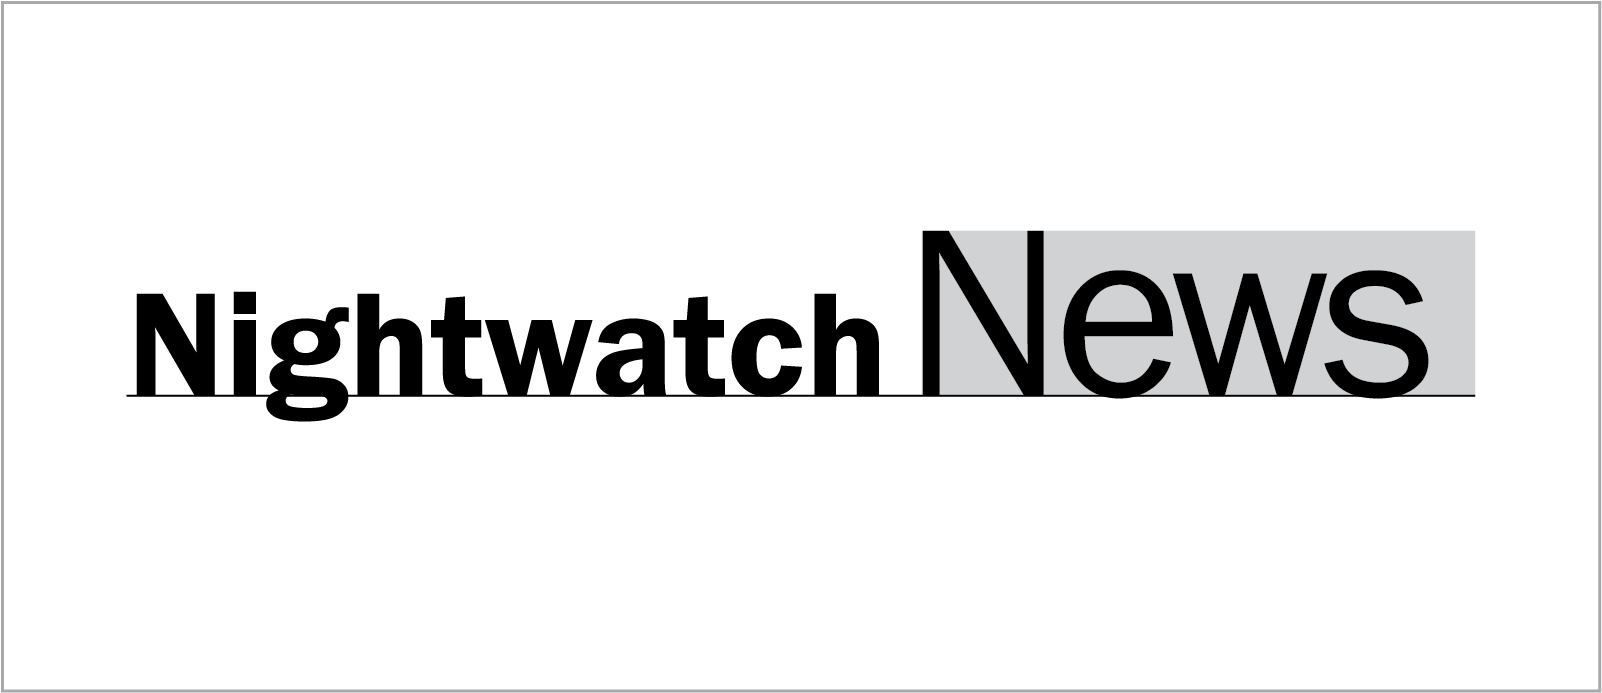 Get more info about Nightwatch News